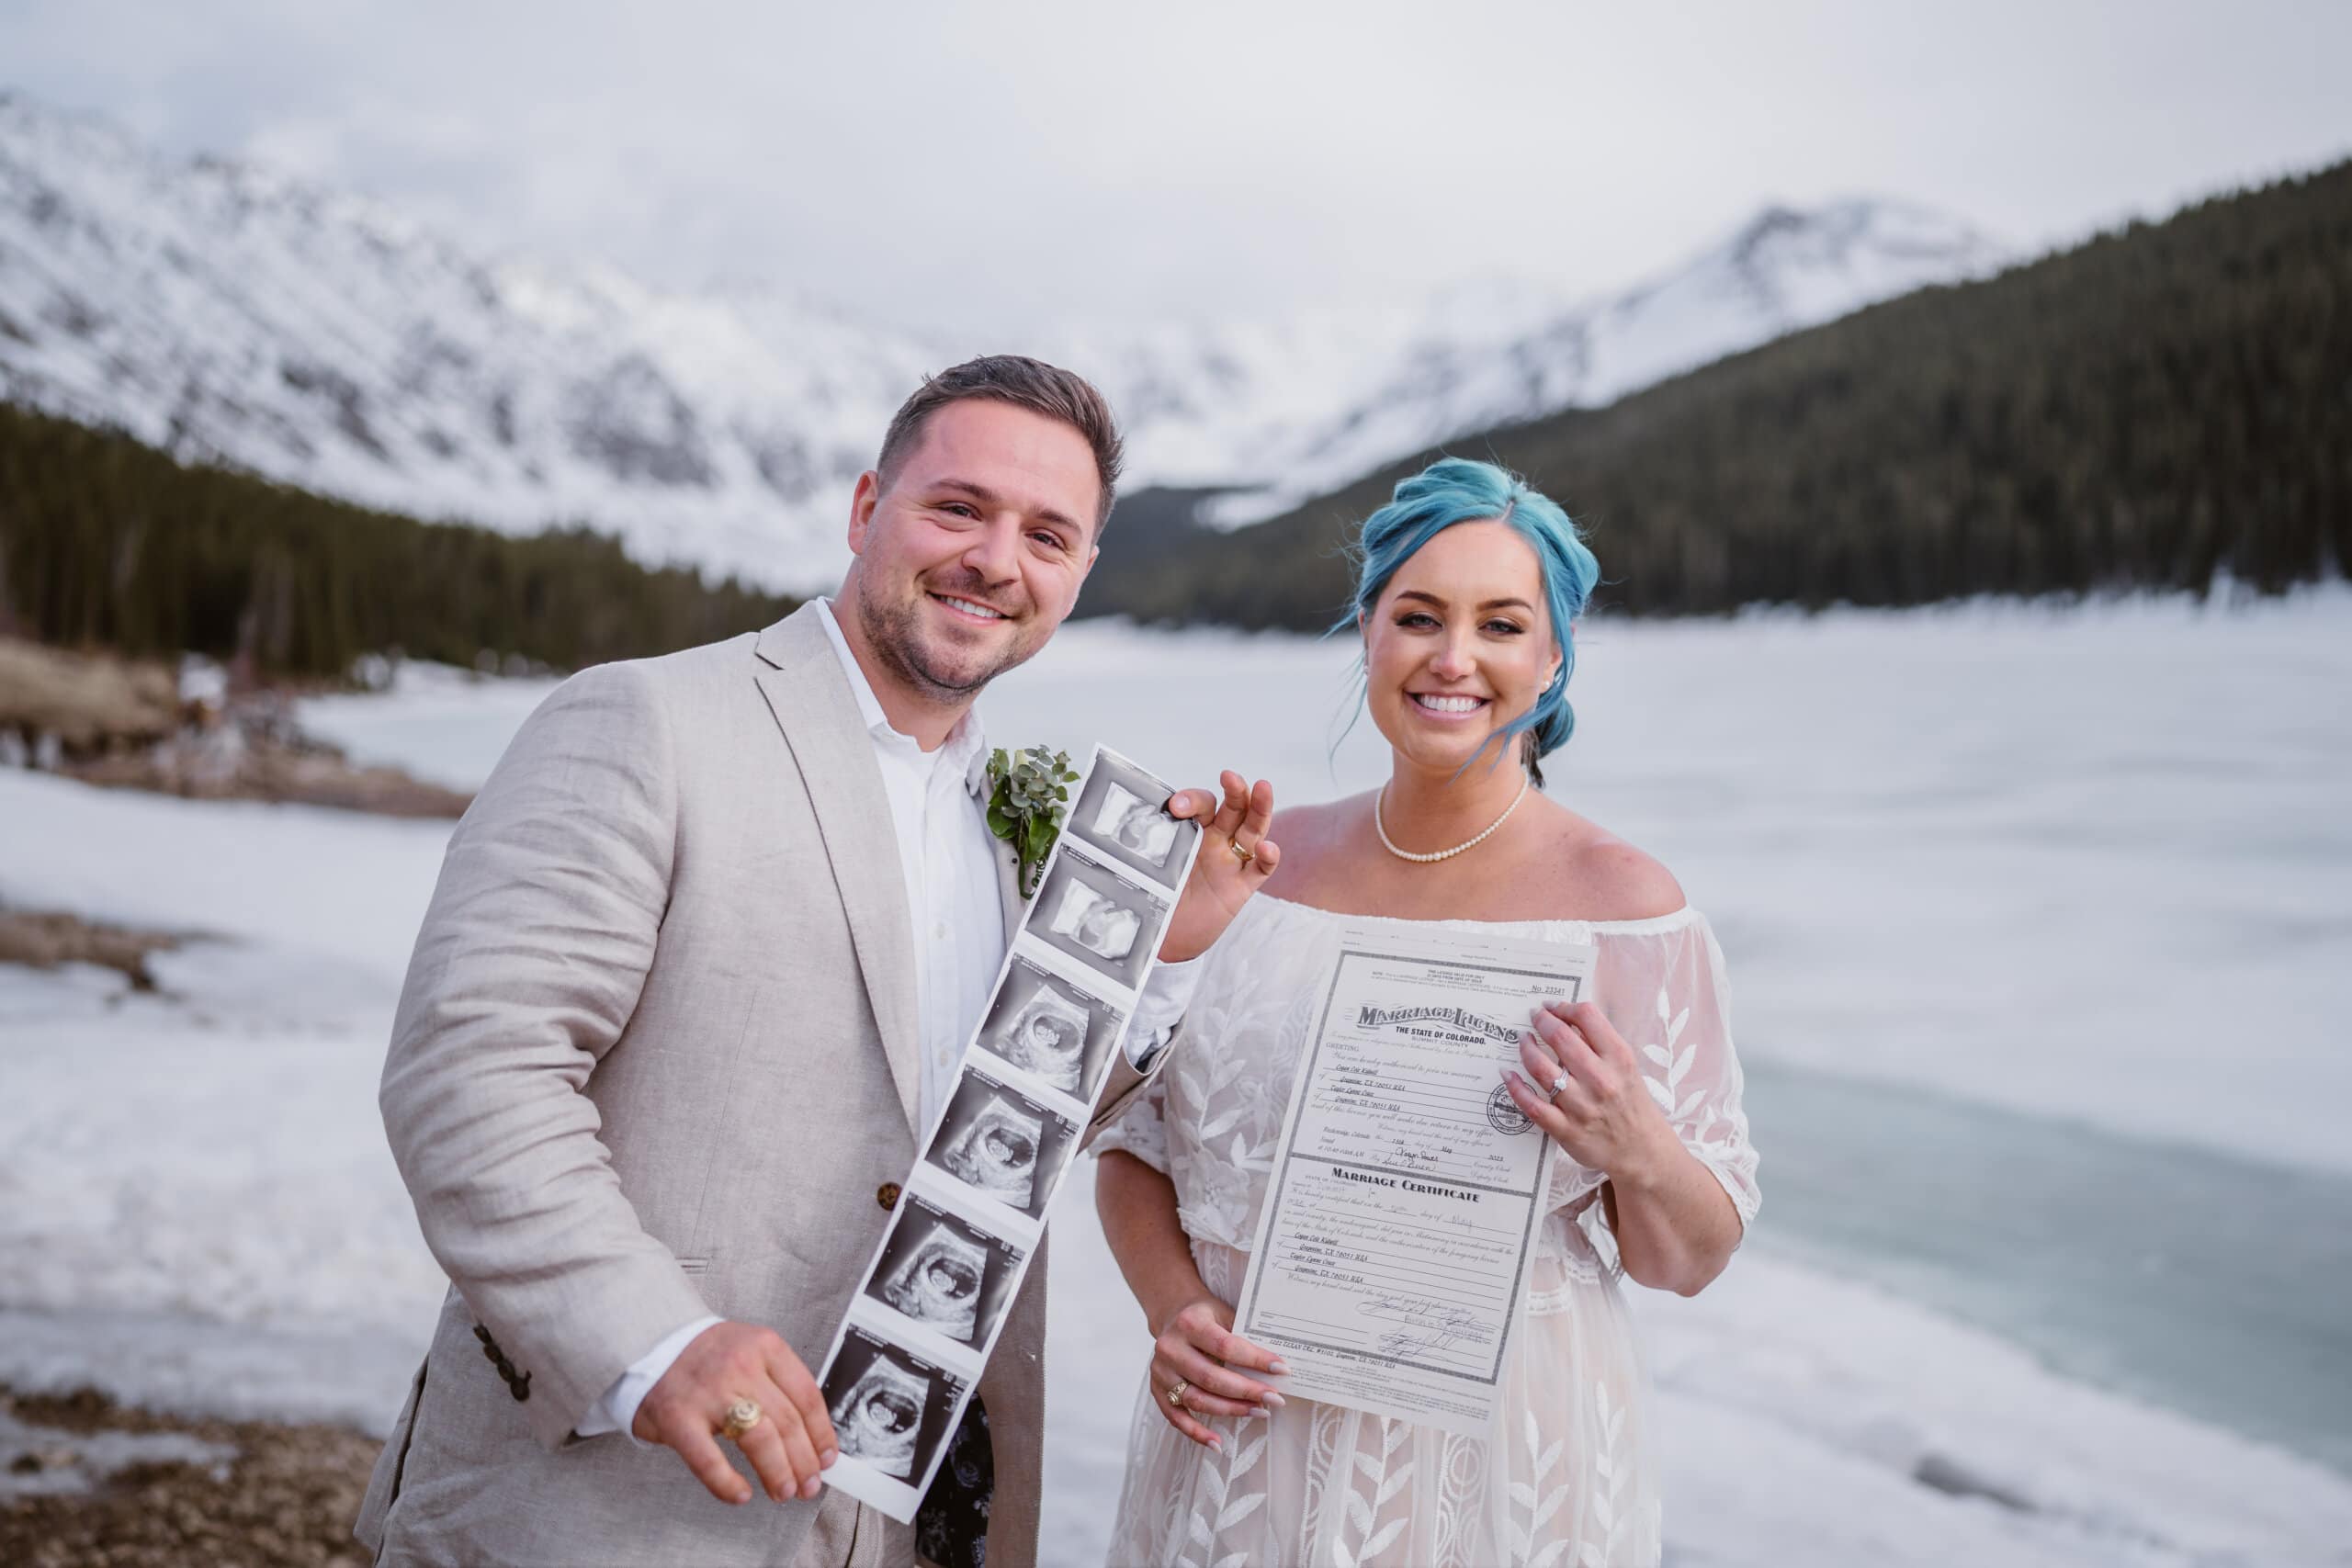 A couple sharing their sonogram and marriage license in Colorado.